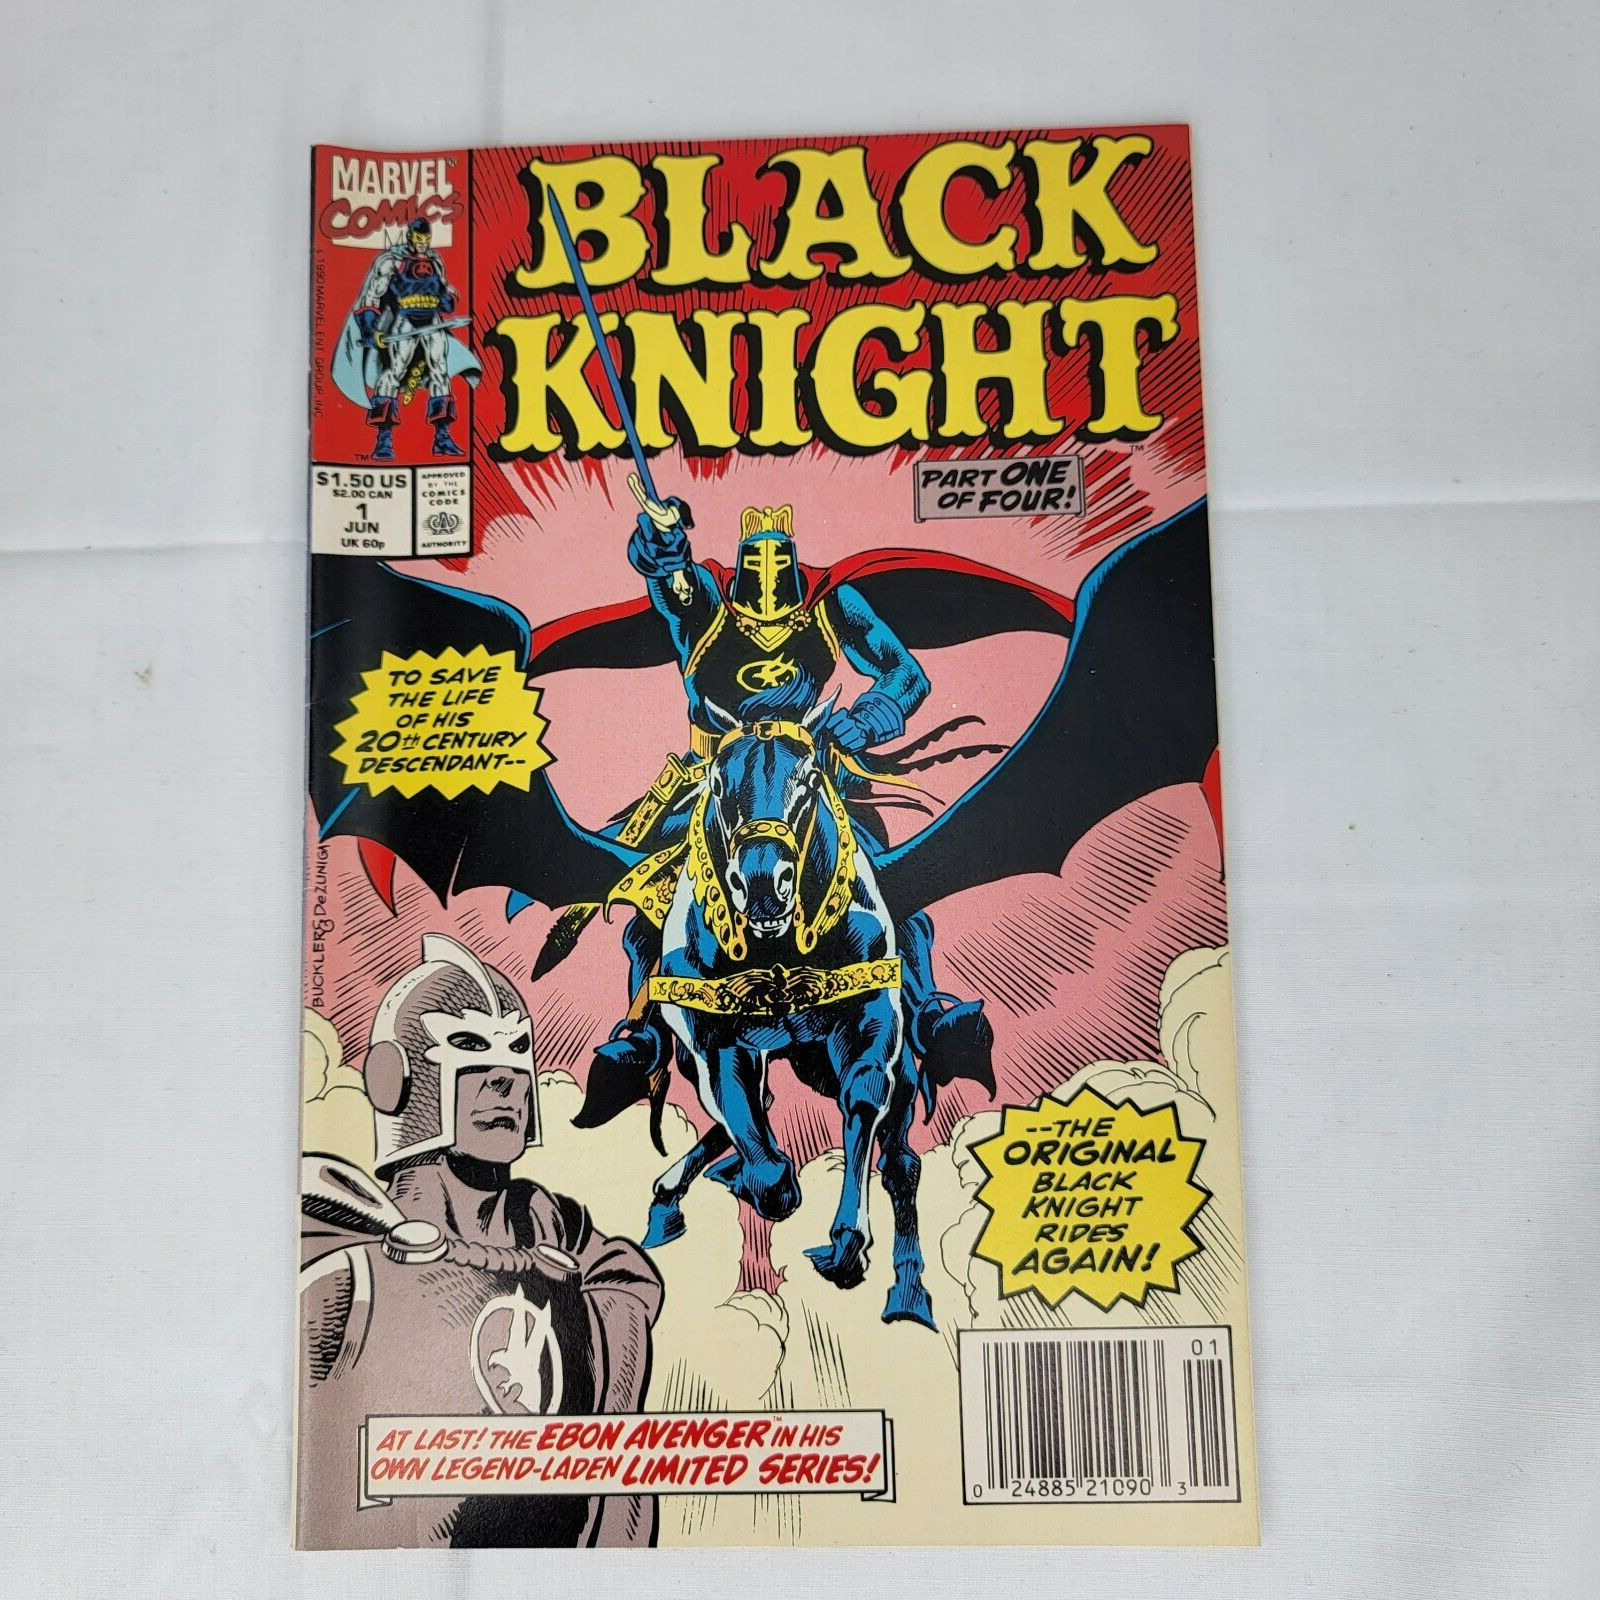 Marvel Comics Black Knight #1 "Part One Of Four!" Comic Book Very Good Condition